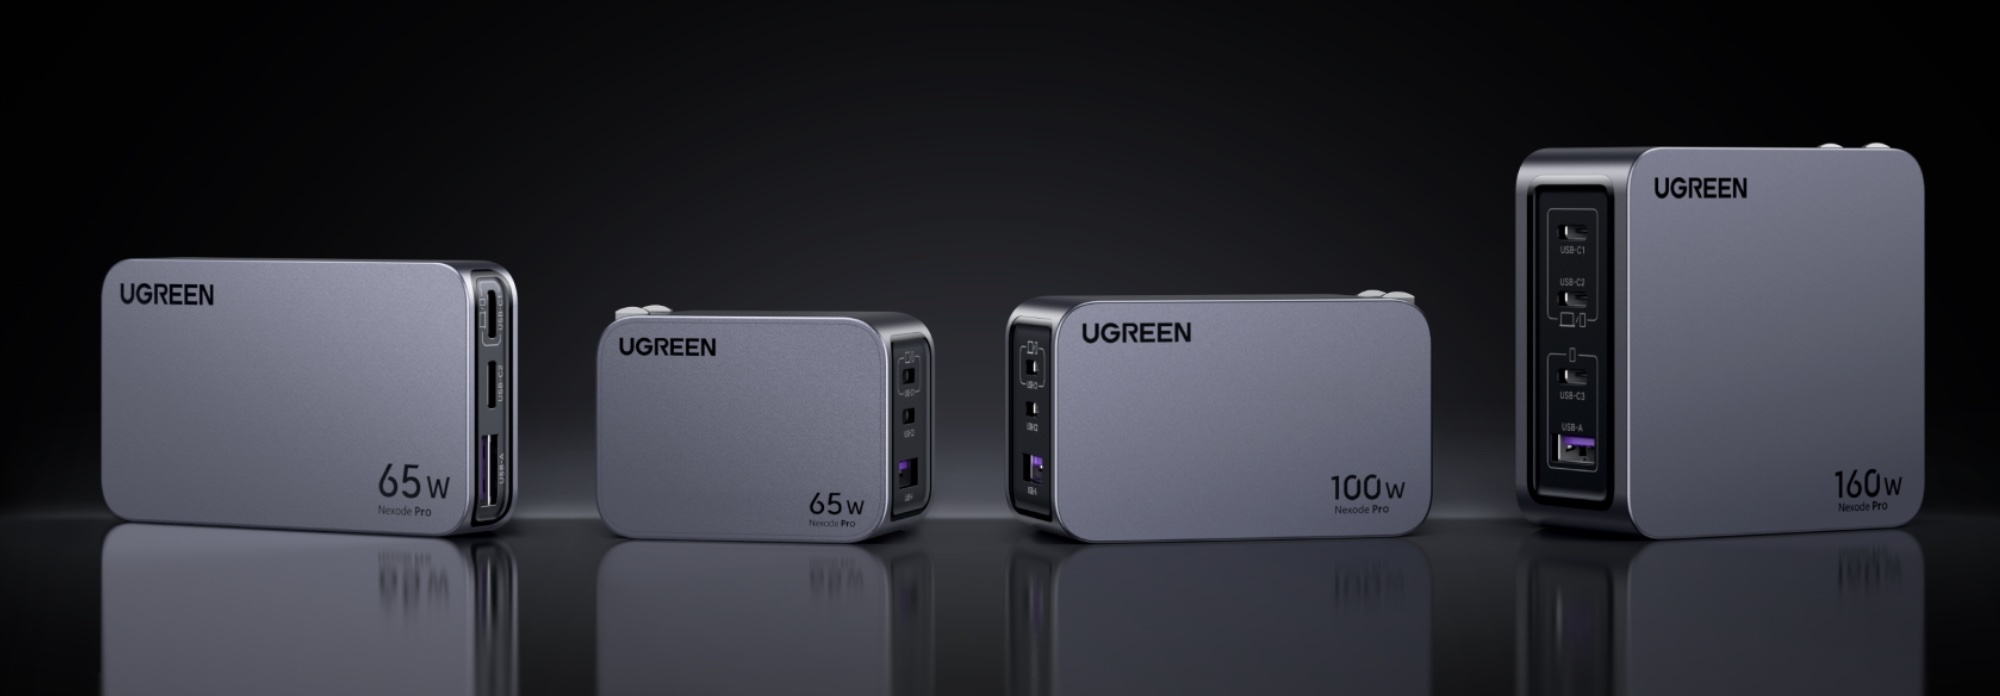 UGREEN launches a new, compact, multi-USB 65W GaN charger via